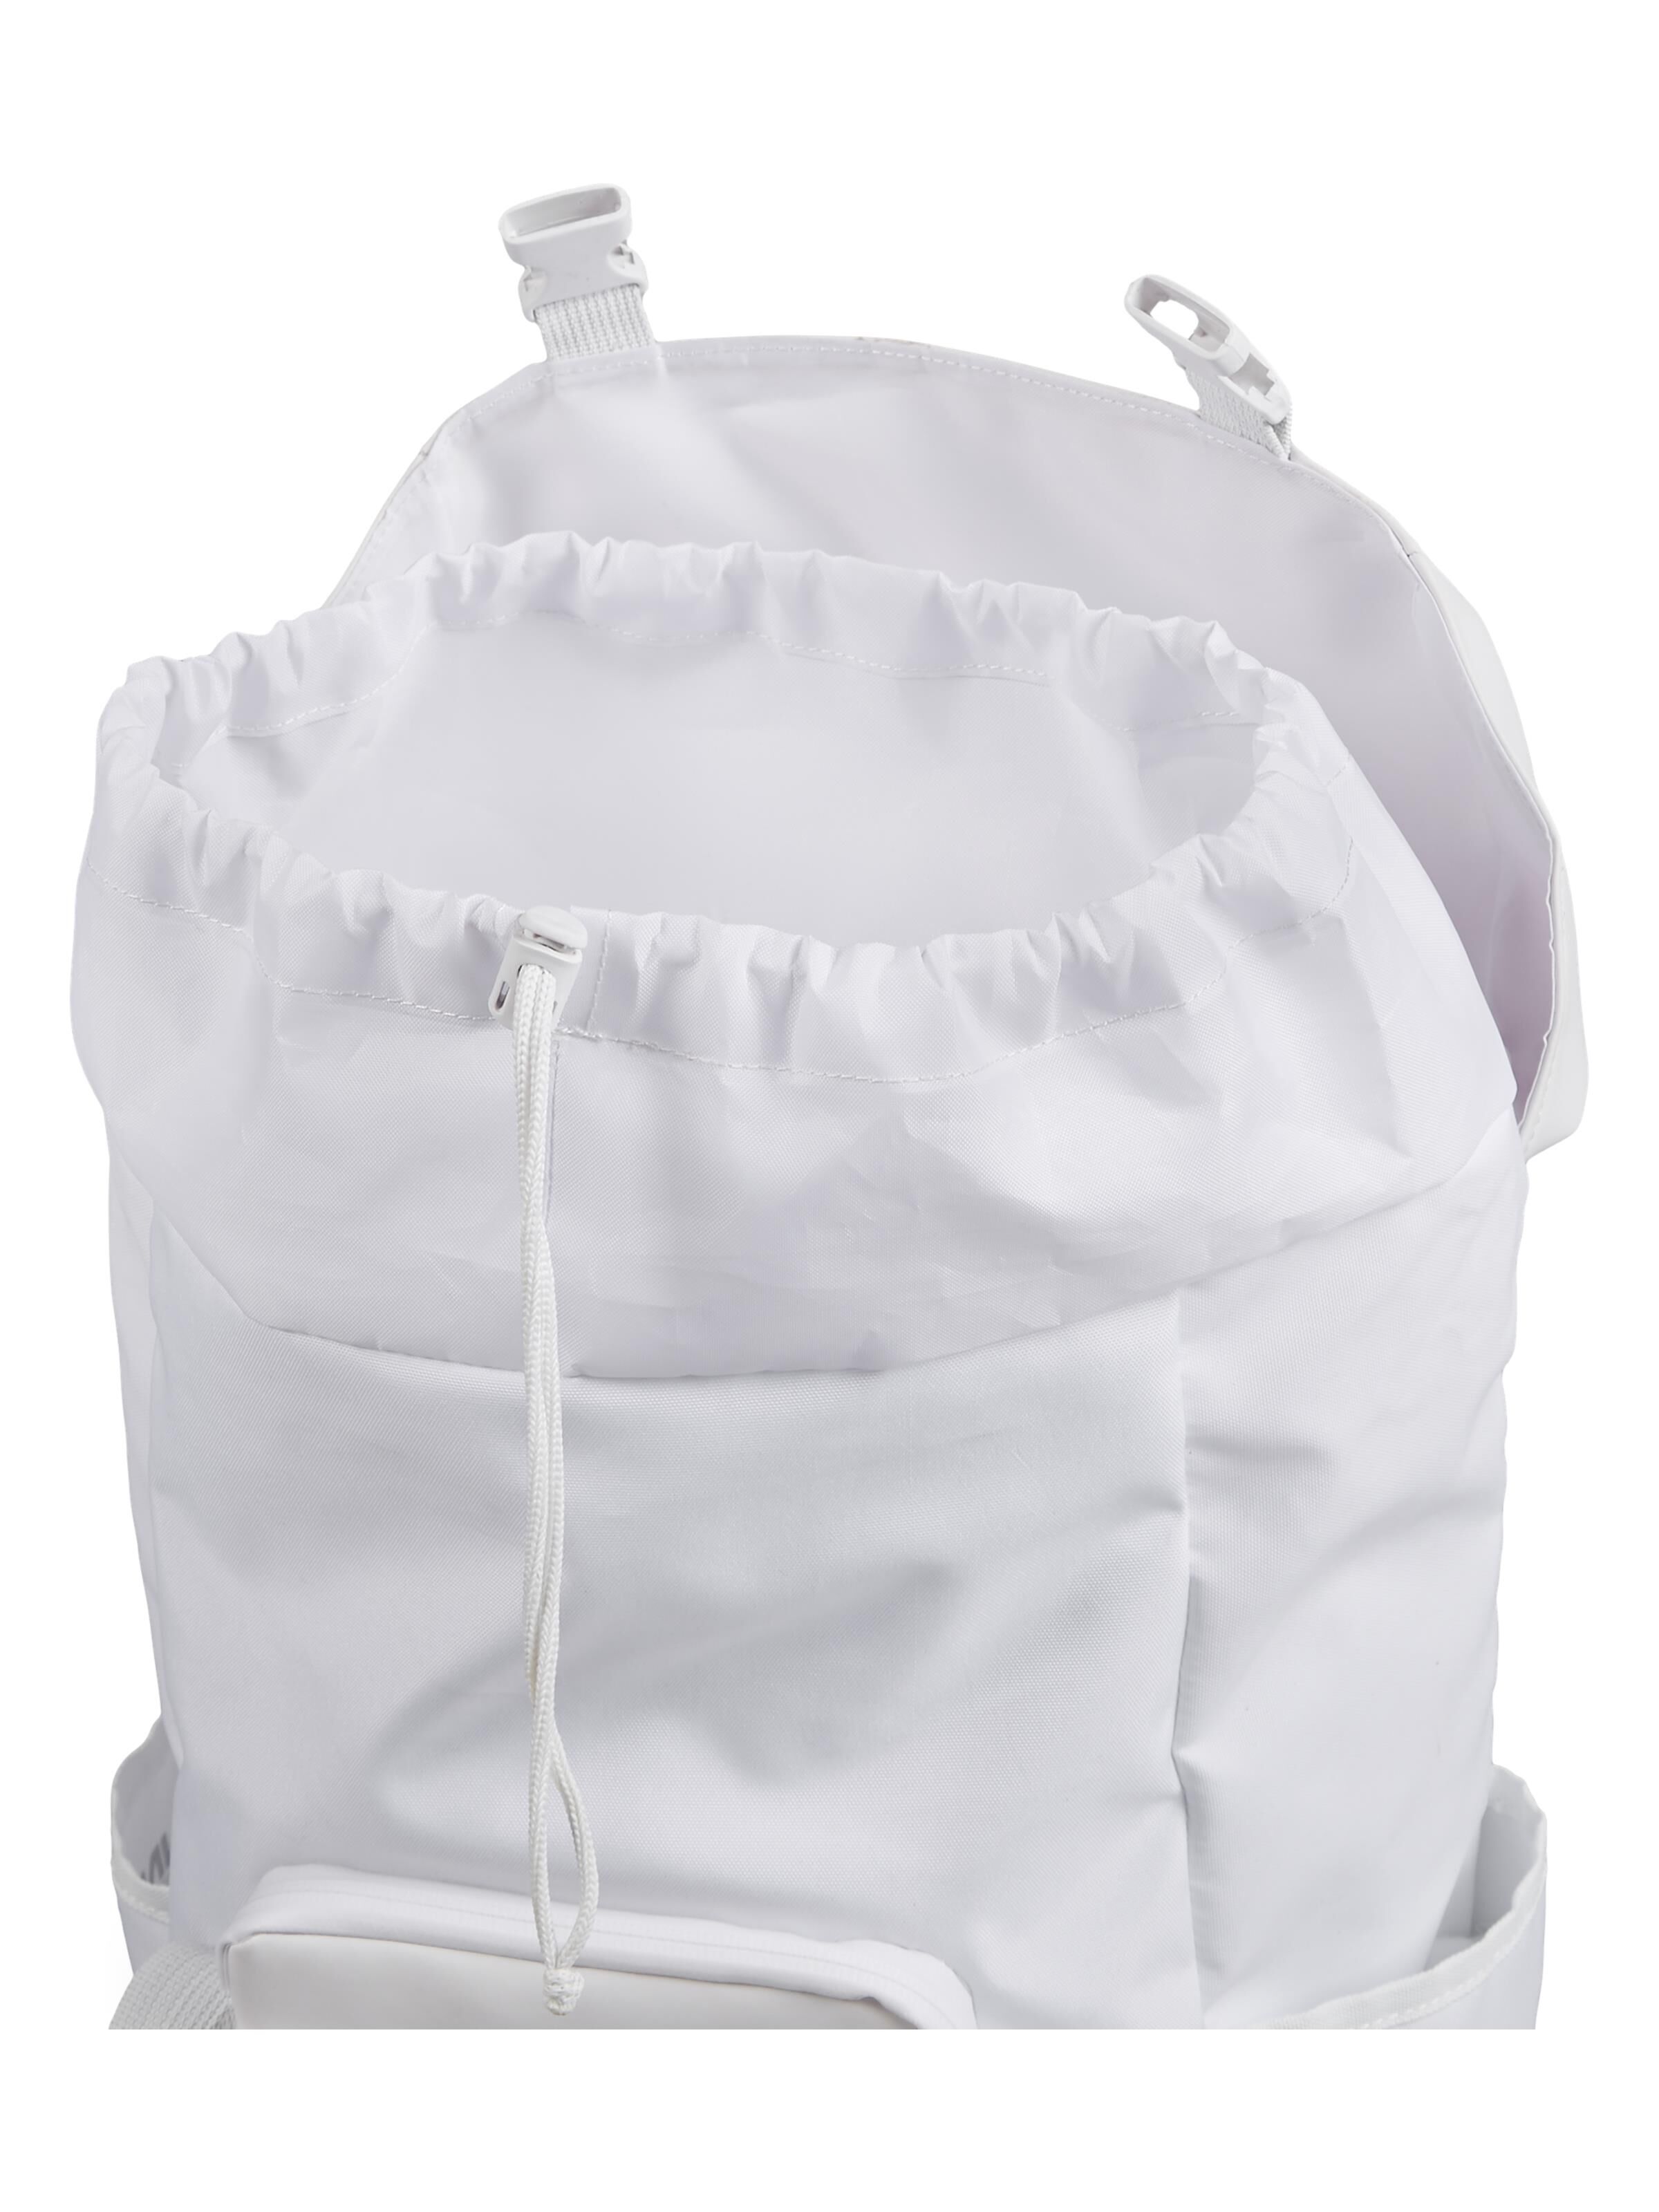 DONNAY by CARLO COLUCCI Rucksack